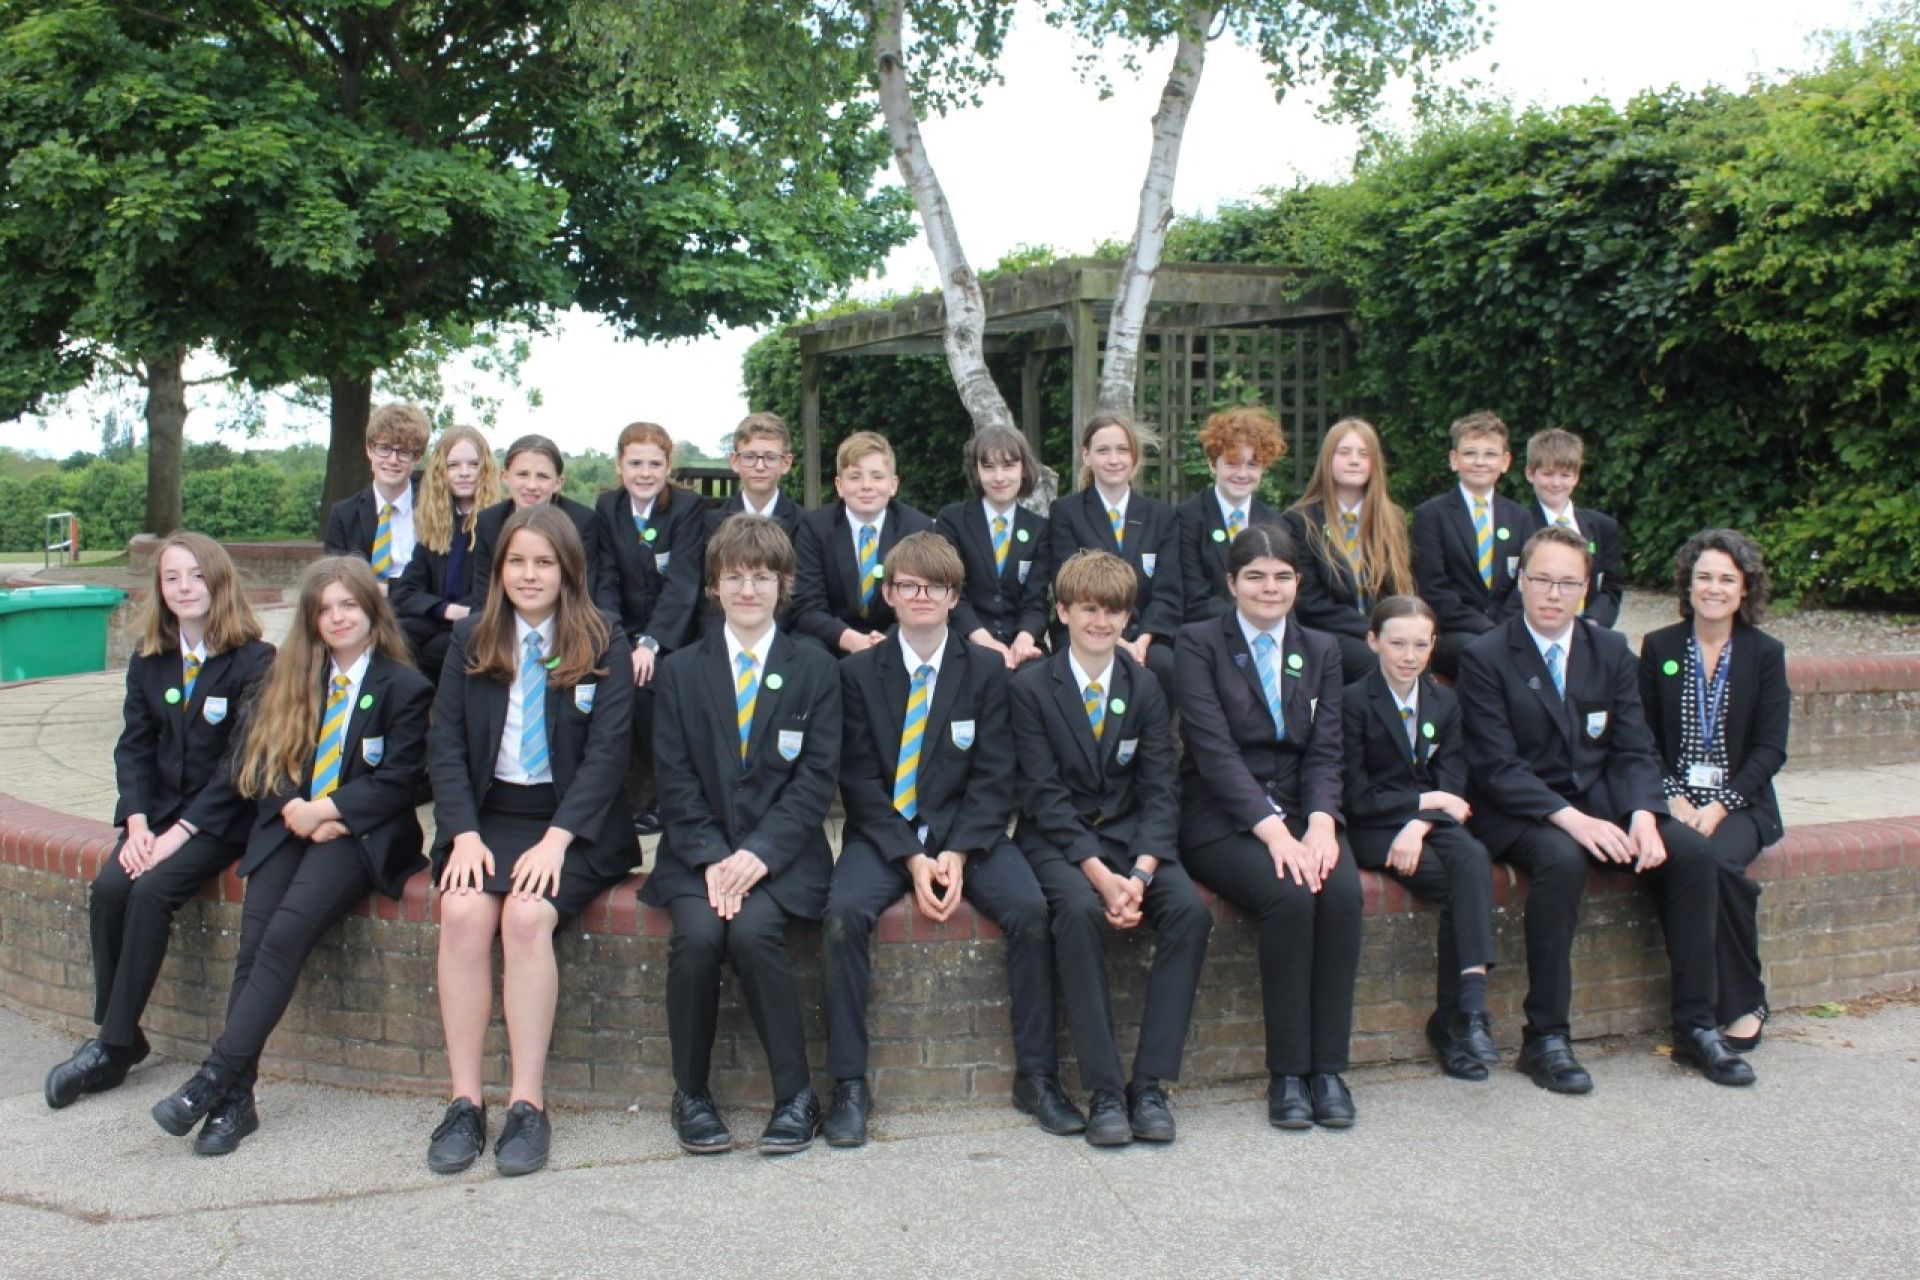 Welcome to the Stour Valley Community School